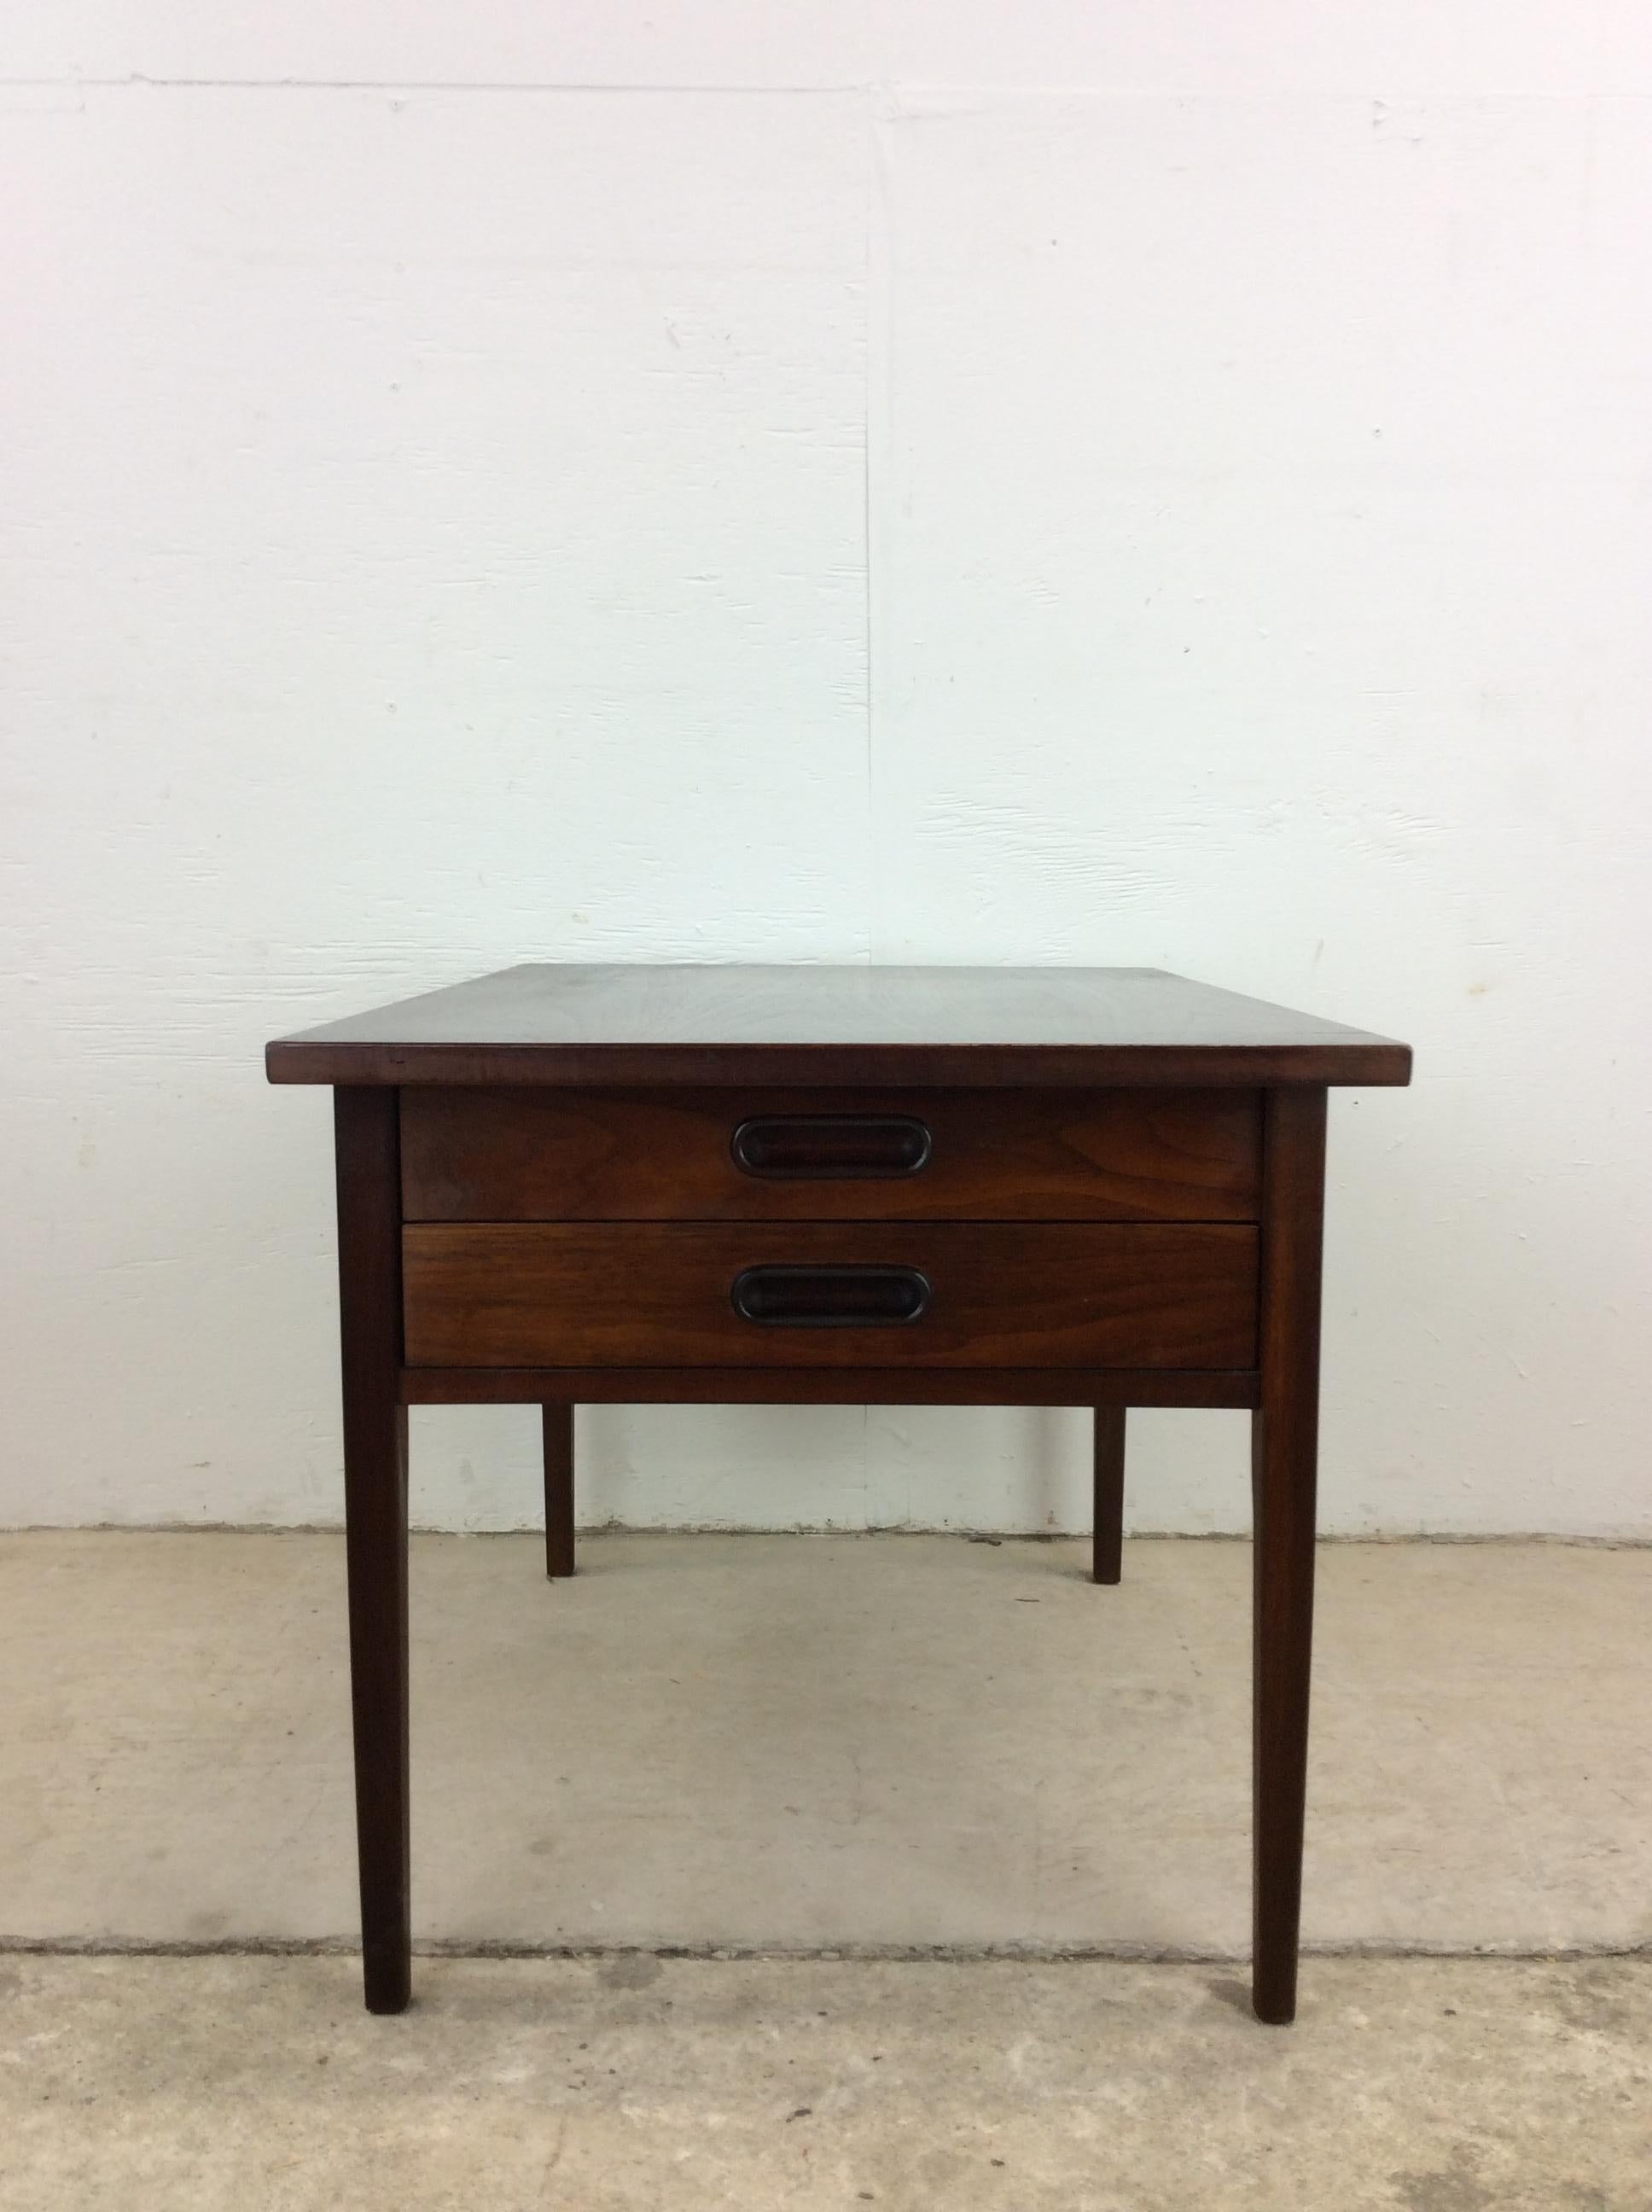 This mid century modern two drawer end table features hardwood construction, original dark walnut finish, two dovetailed drawers with carved wood pulls, and tall tapered legs. 
Dimensions: 21w 130d 35h 21.25sh

Condition: Original dark finish has